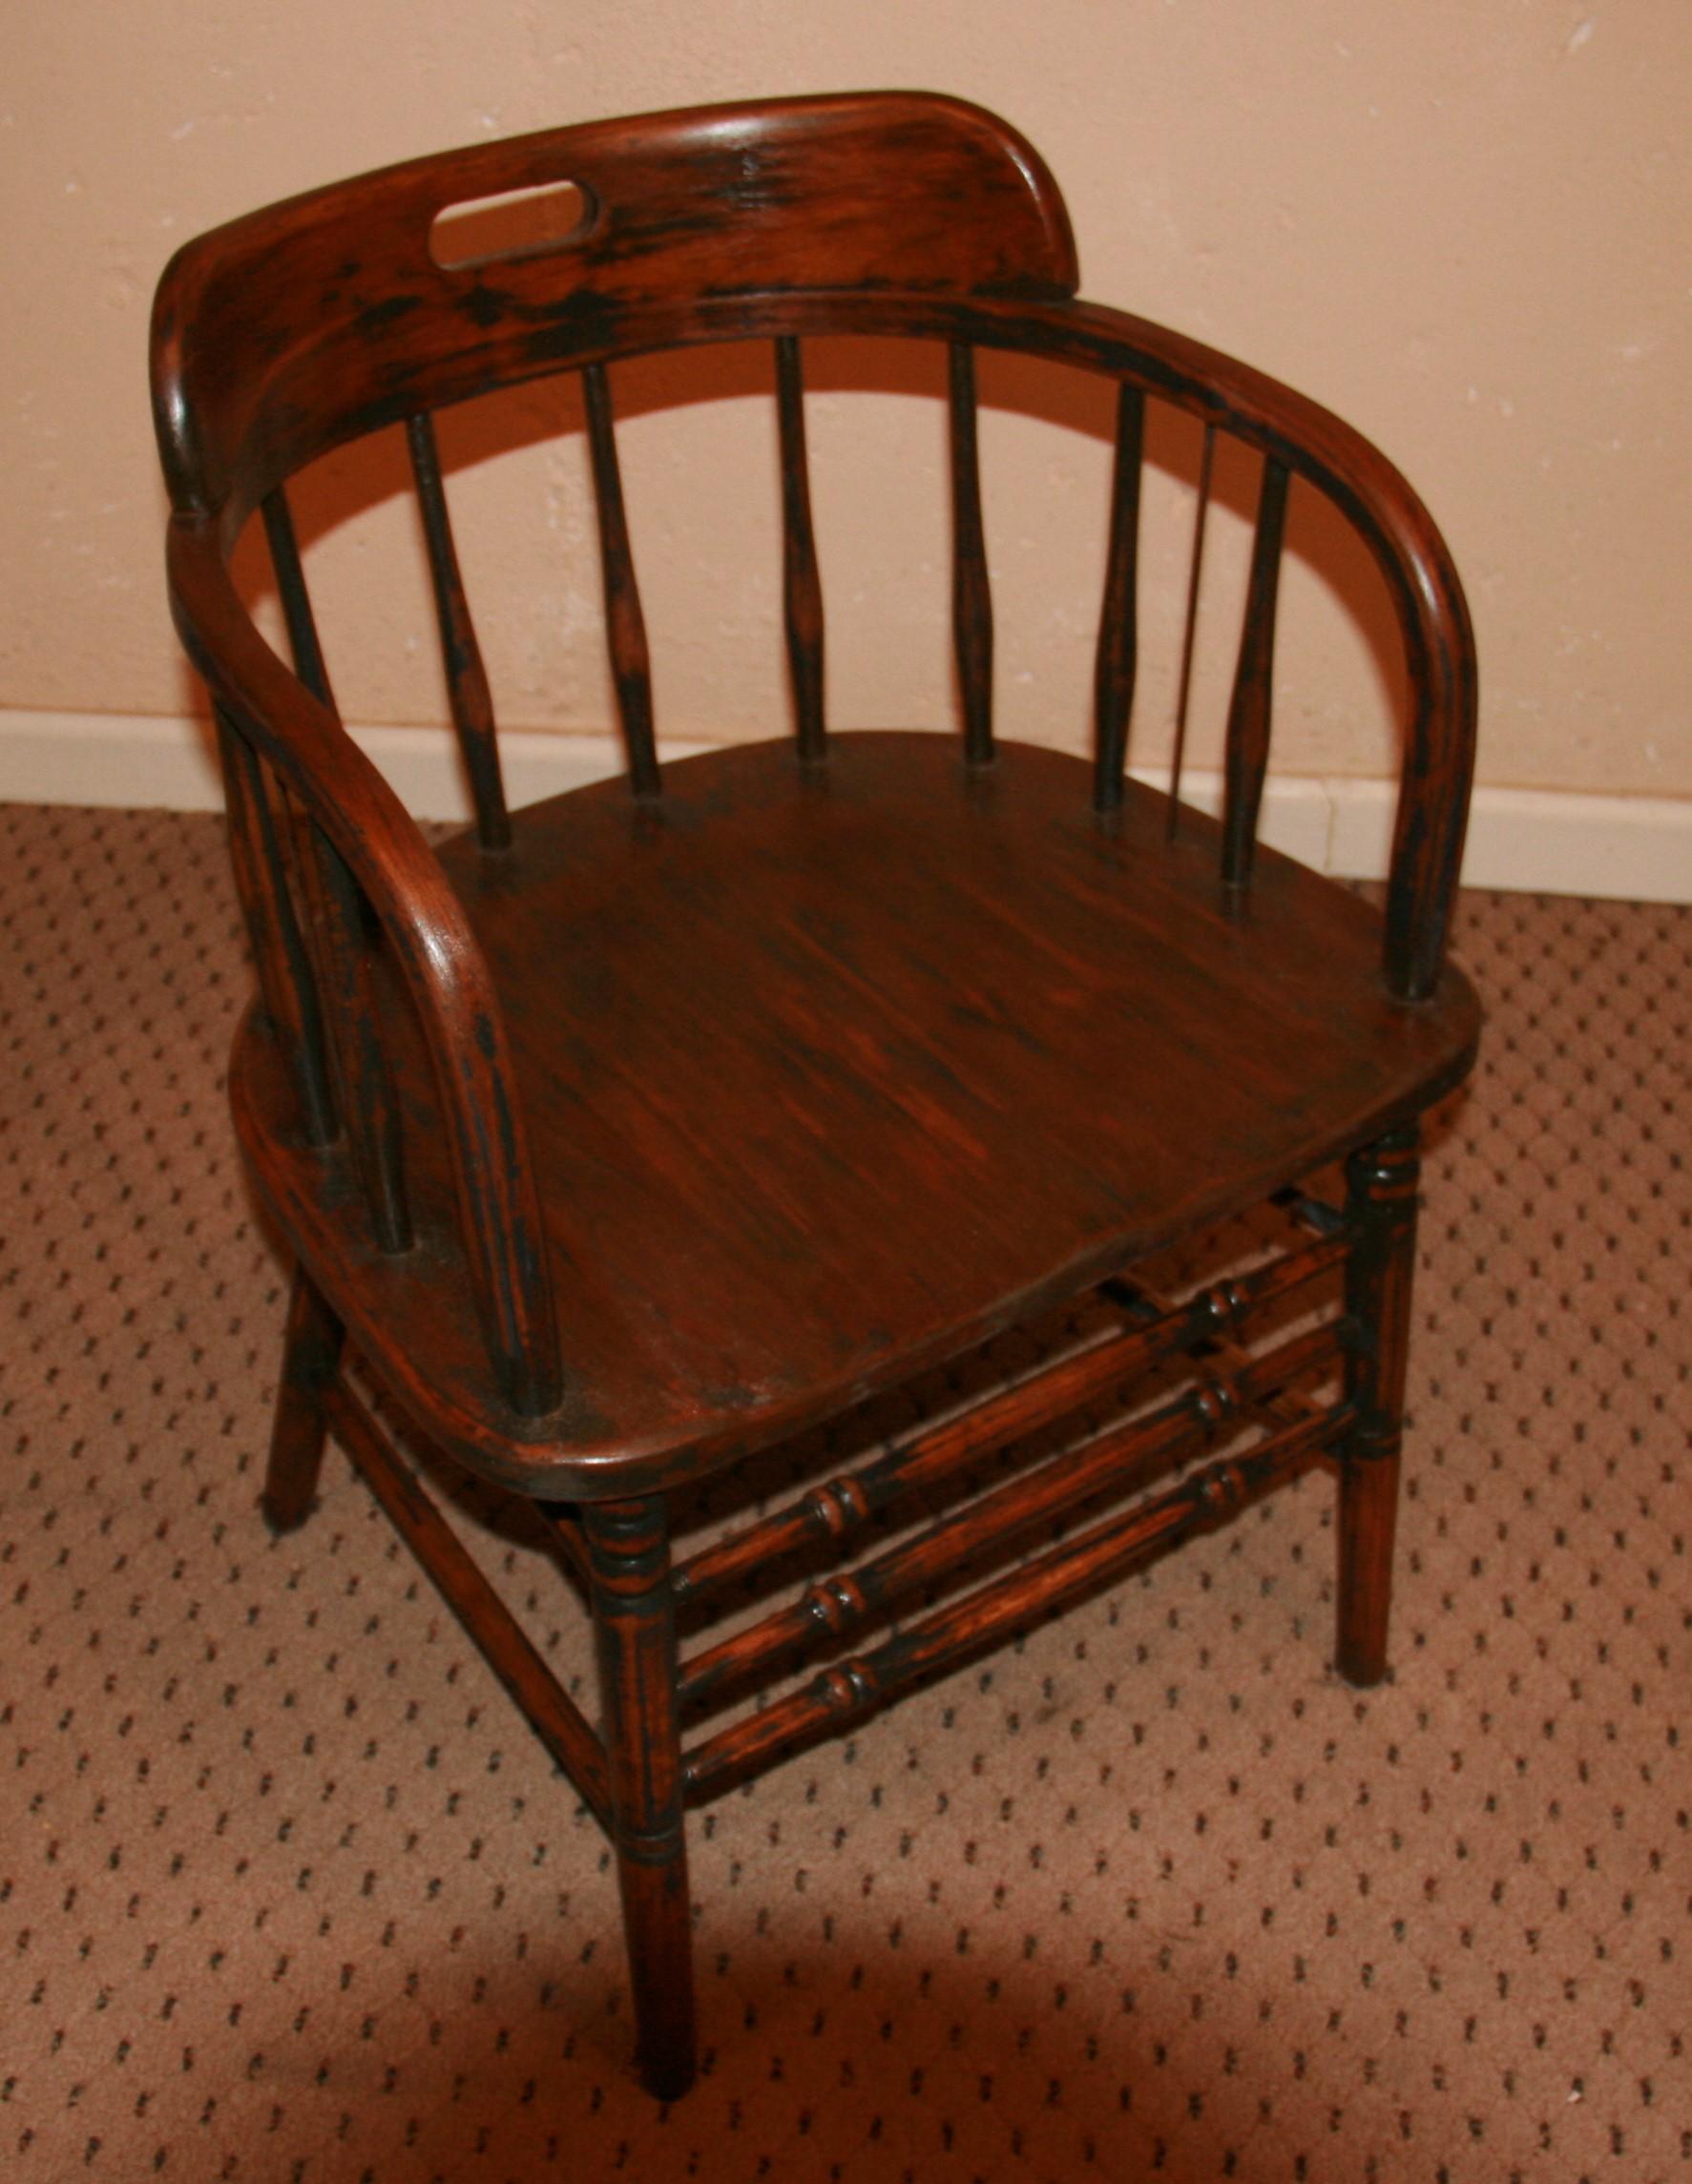 English barrel back hardwood chair with curved arm support ,saddled seat and turned legs and stretcher, great color